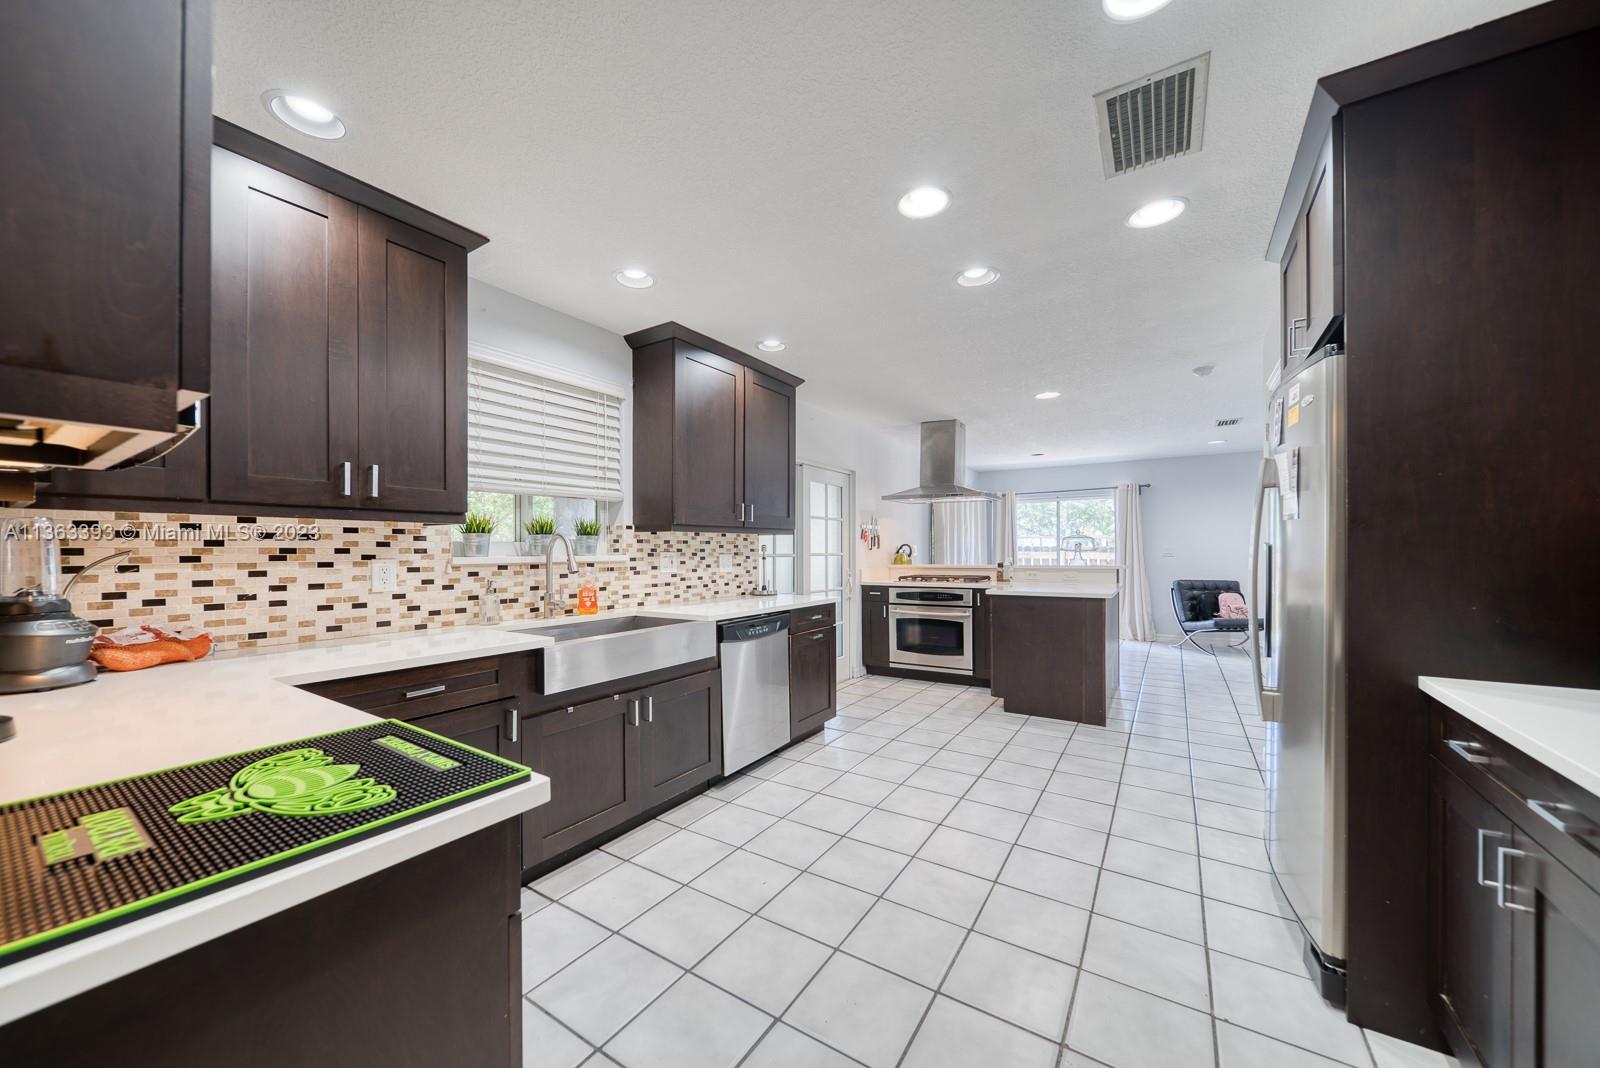 a large kitchen with a large counter top space appliances and cabinets